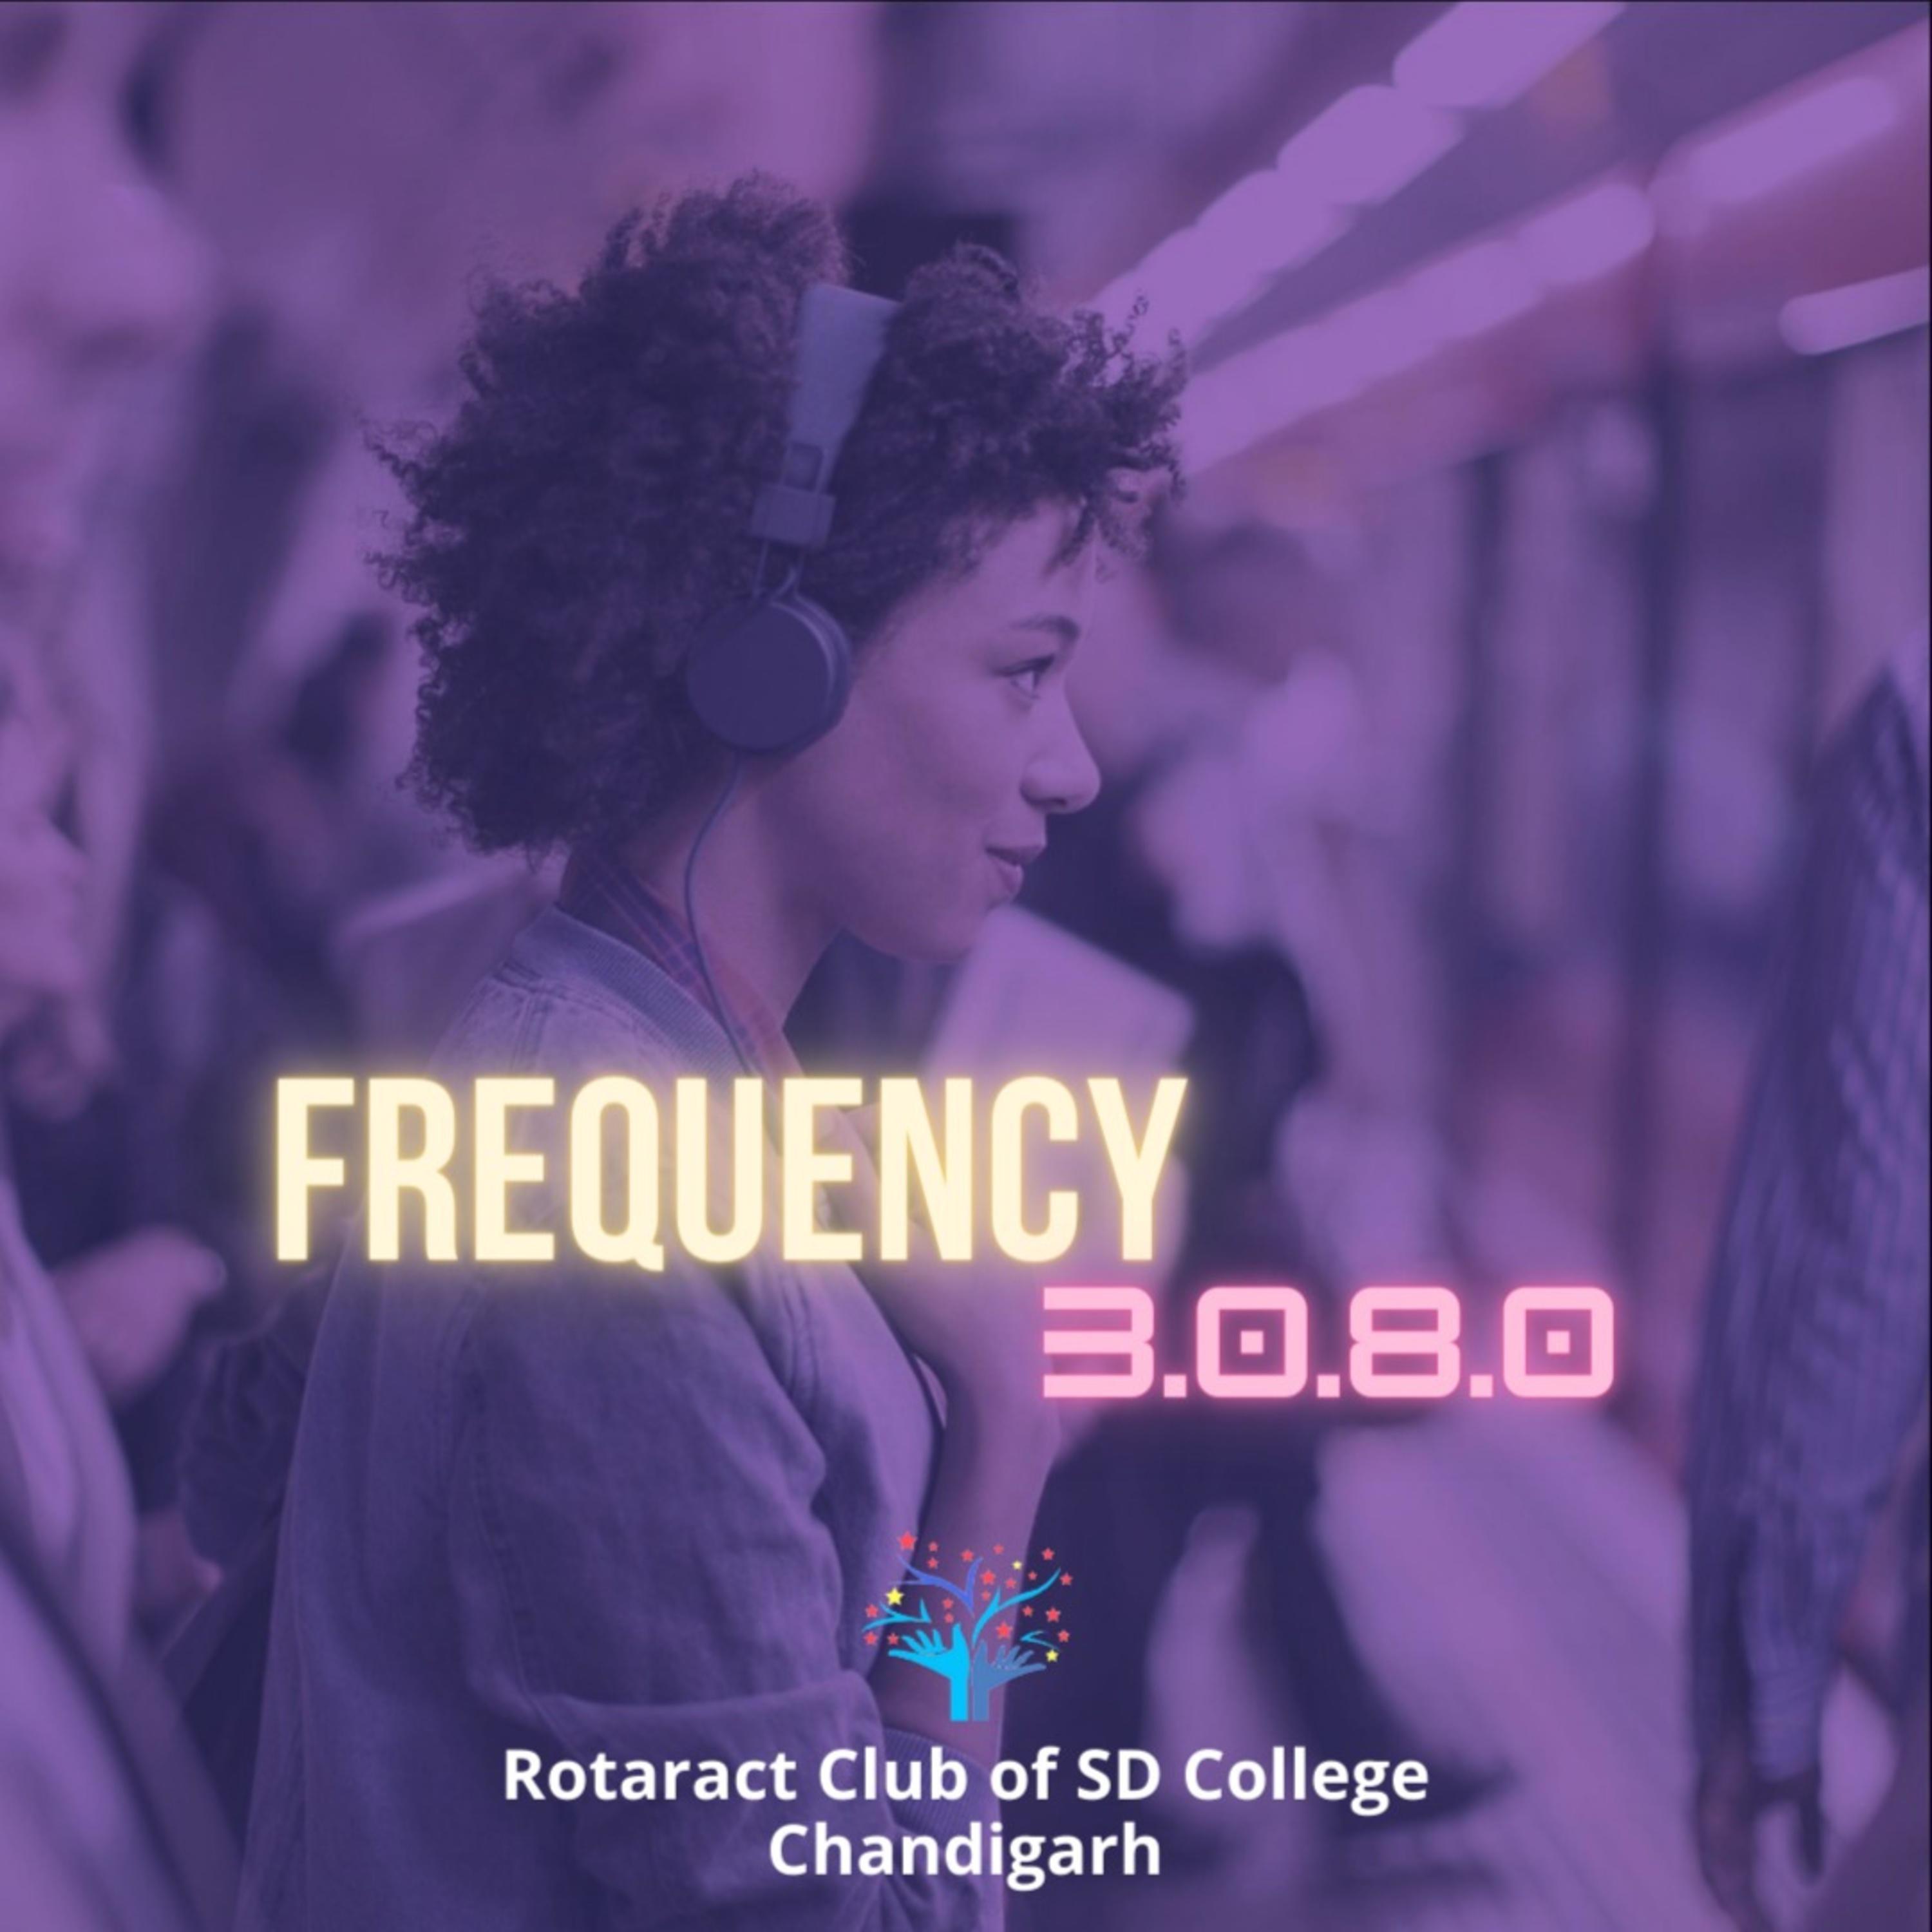 FREQUENCY 3.0.8.0